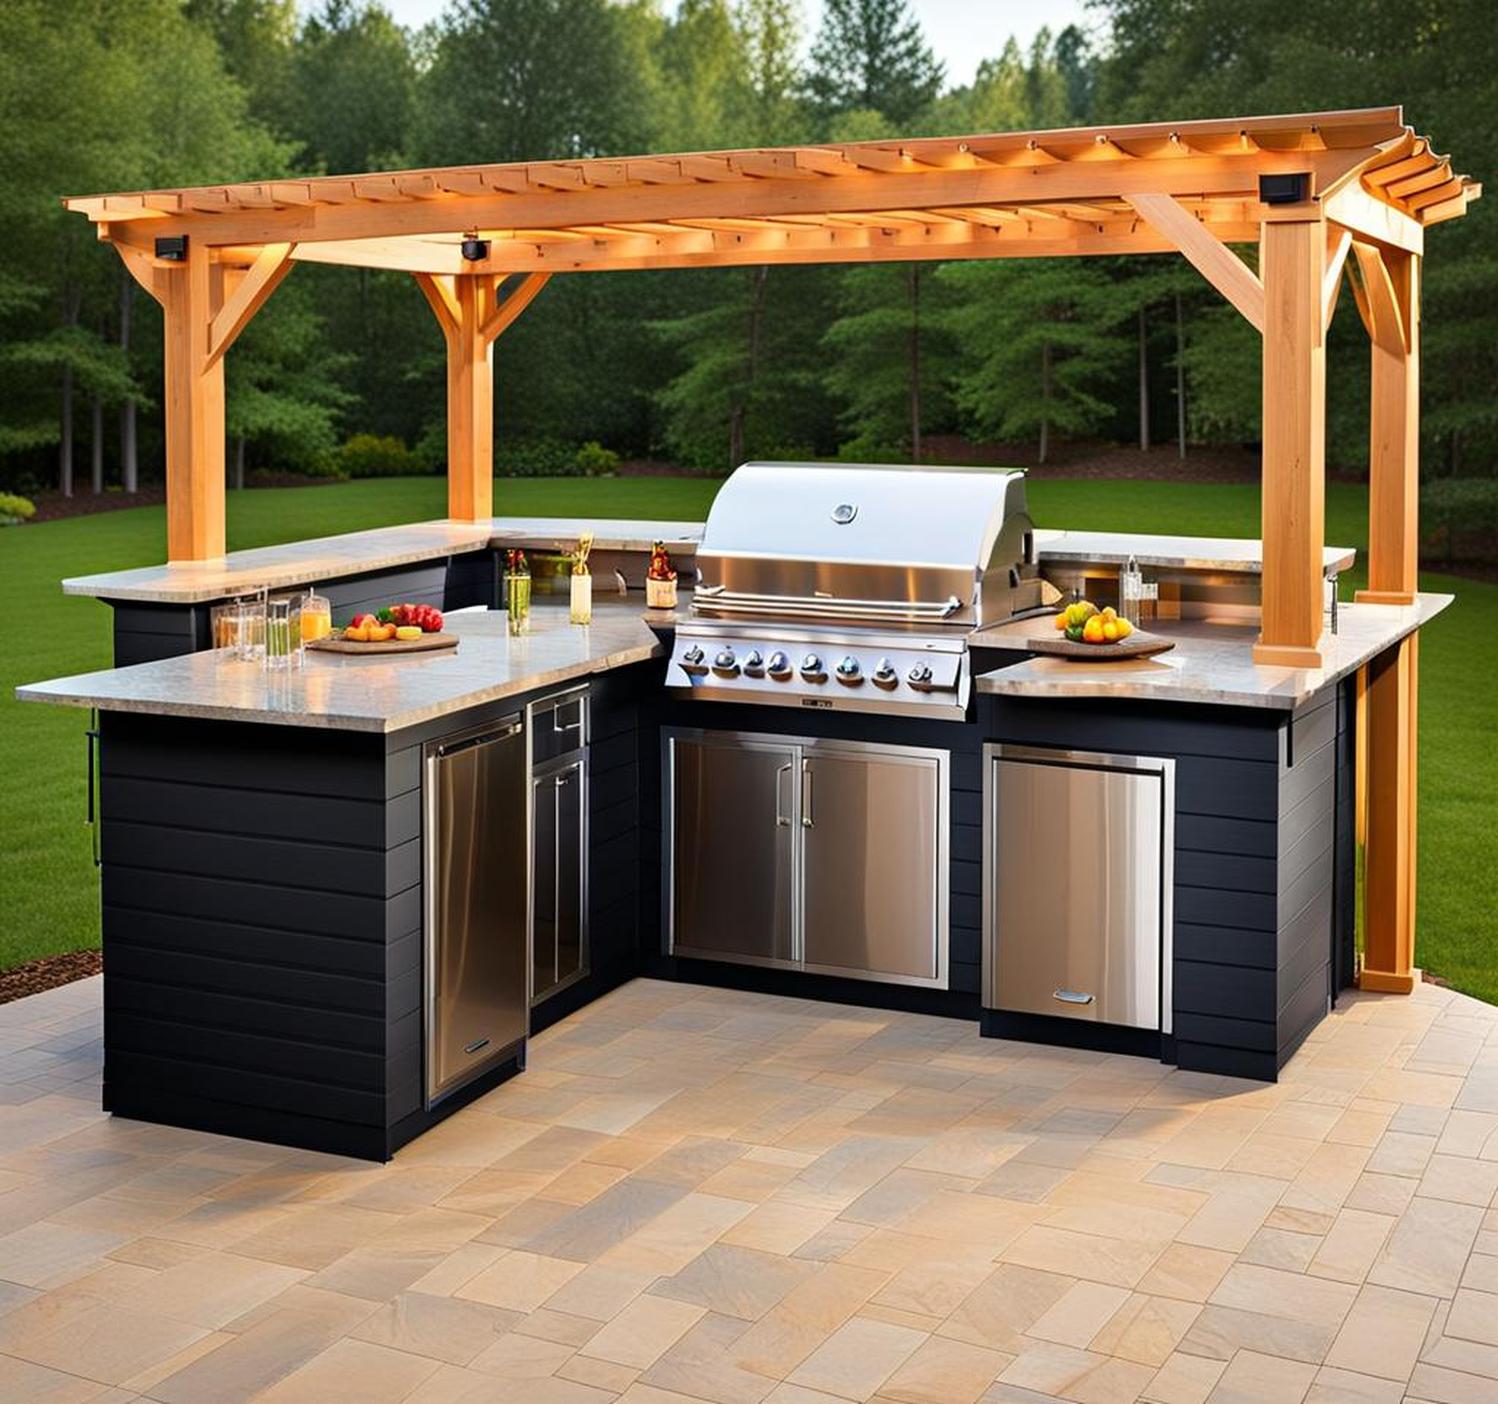 Build Your Dream Outdoor Kitchen With These DIY Frame Plans